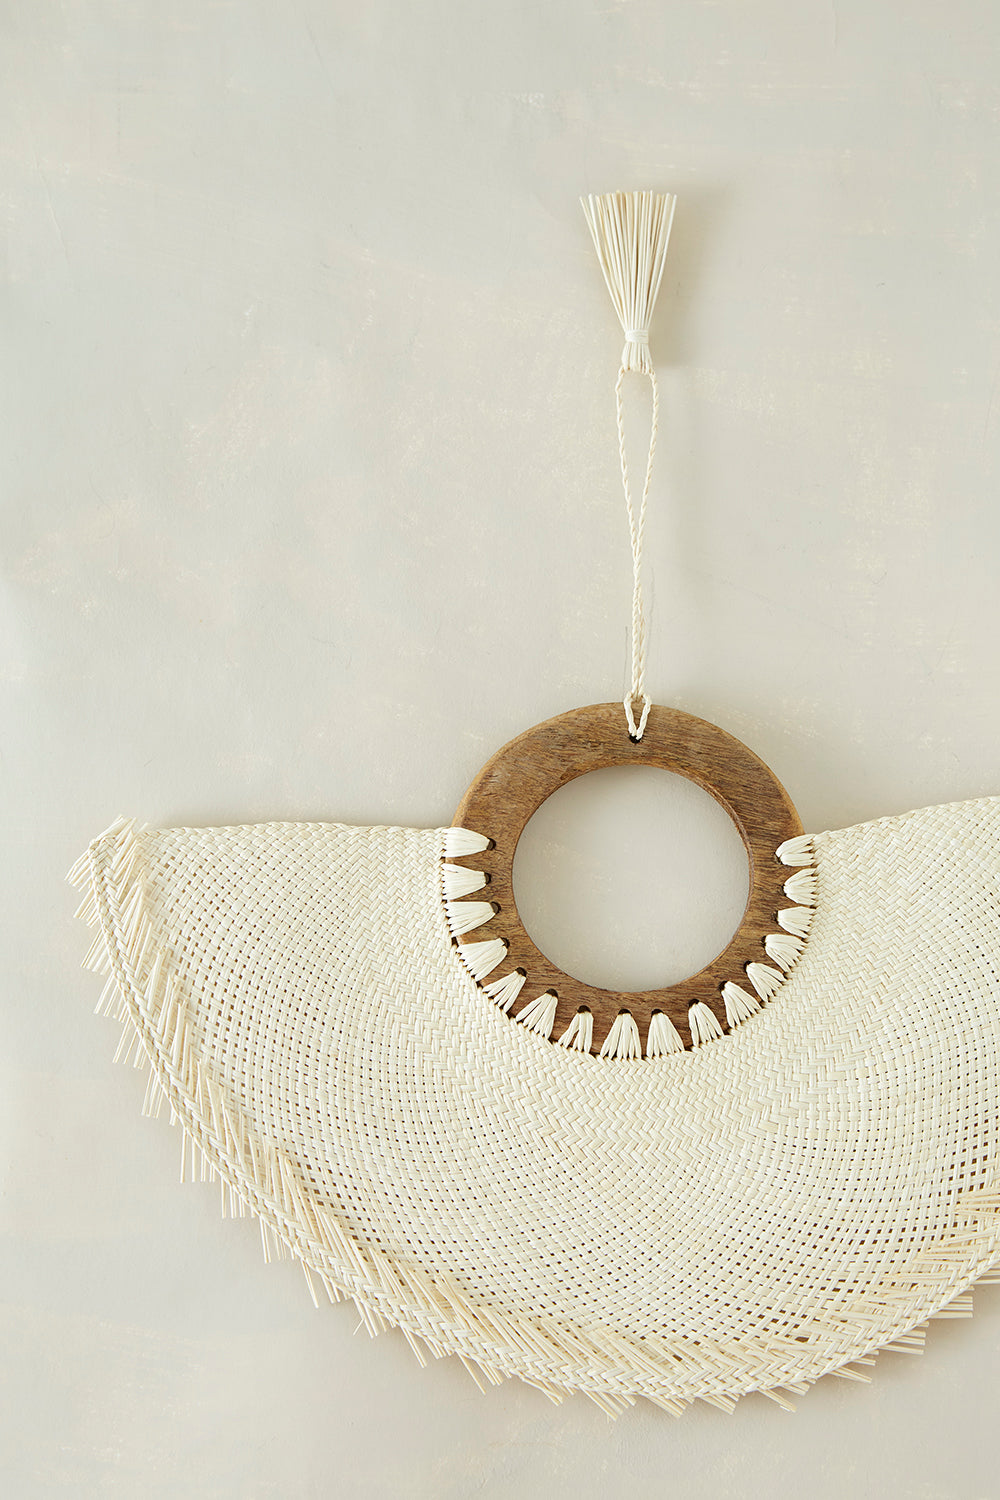 Artisan & Fox - Homewares - JIPIJAPA Handwoven Wall Decor in Natural Undyed - Handcrafted in Mexico